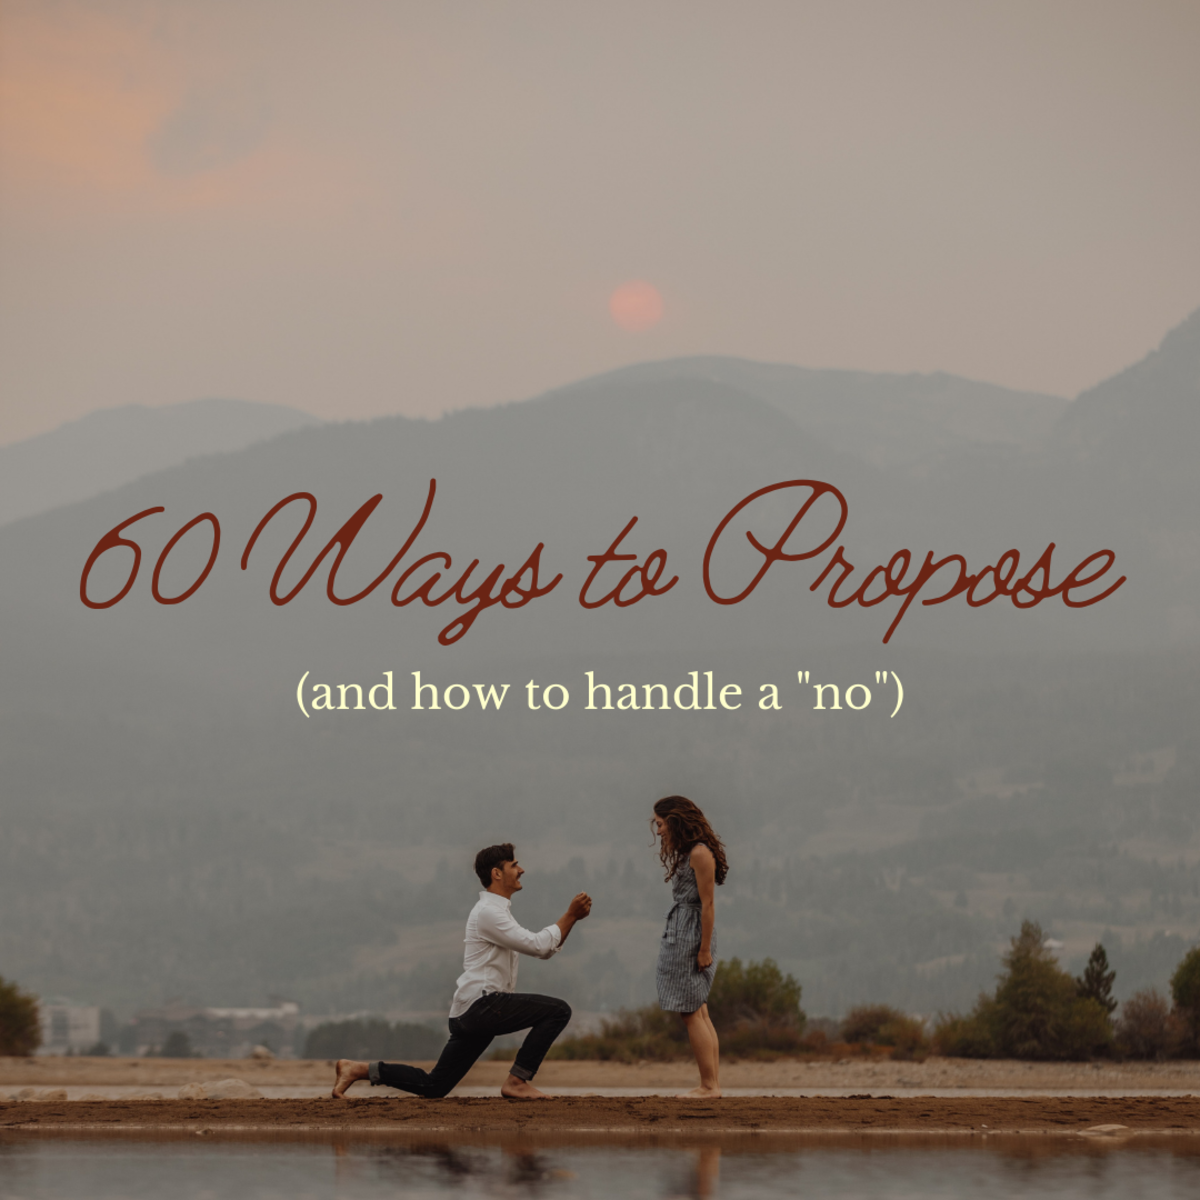 How to Propose to a Girl: 60 Ways to Pop the Question